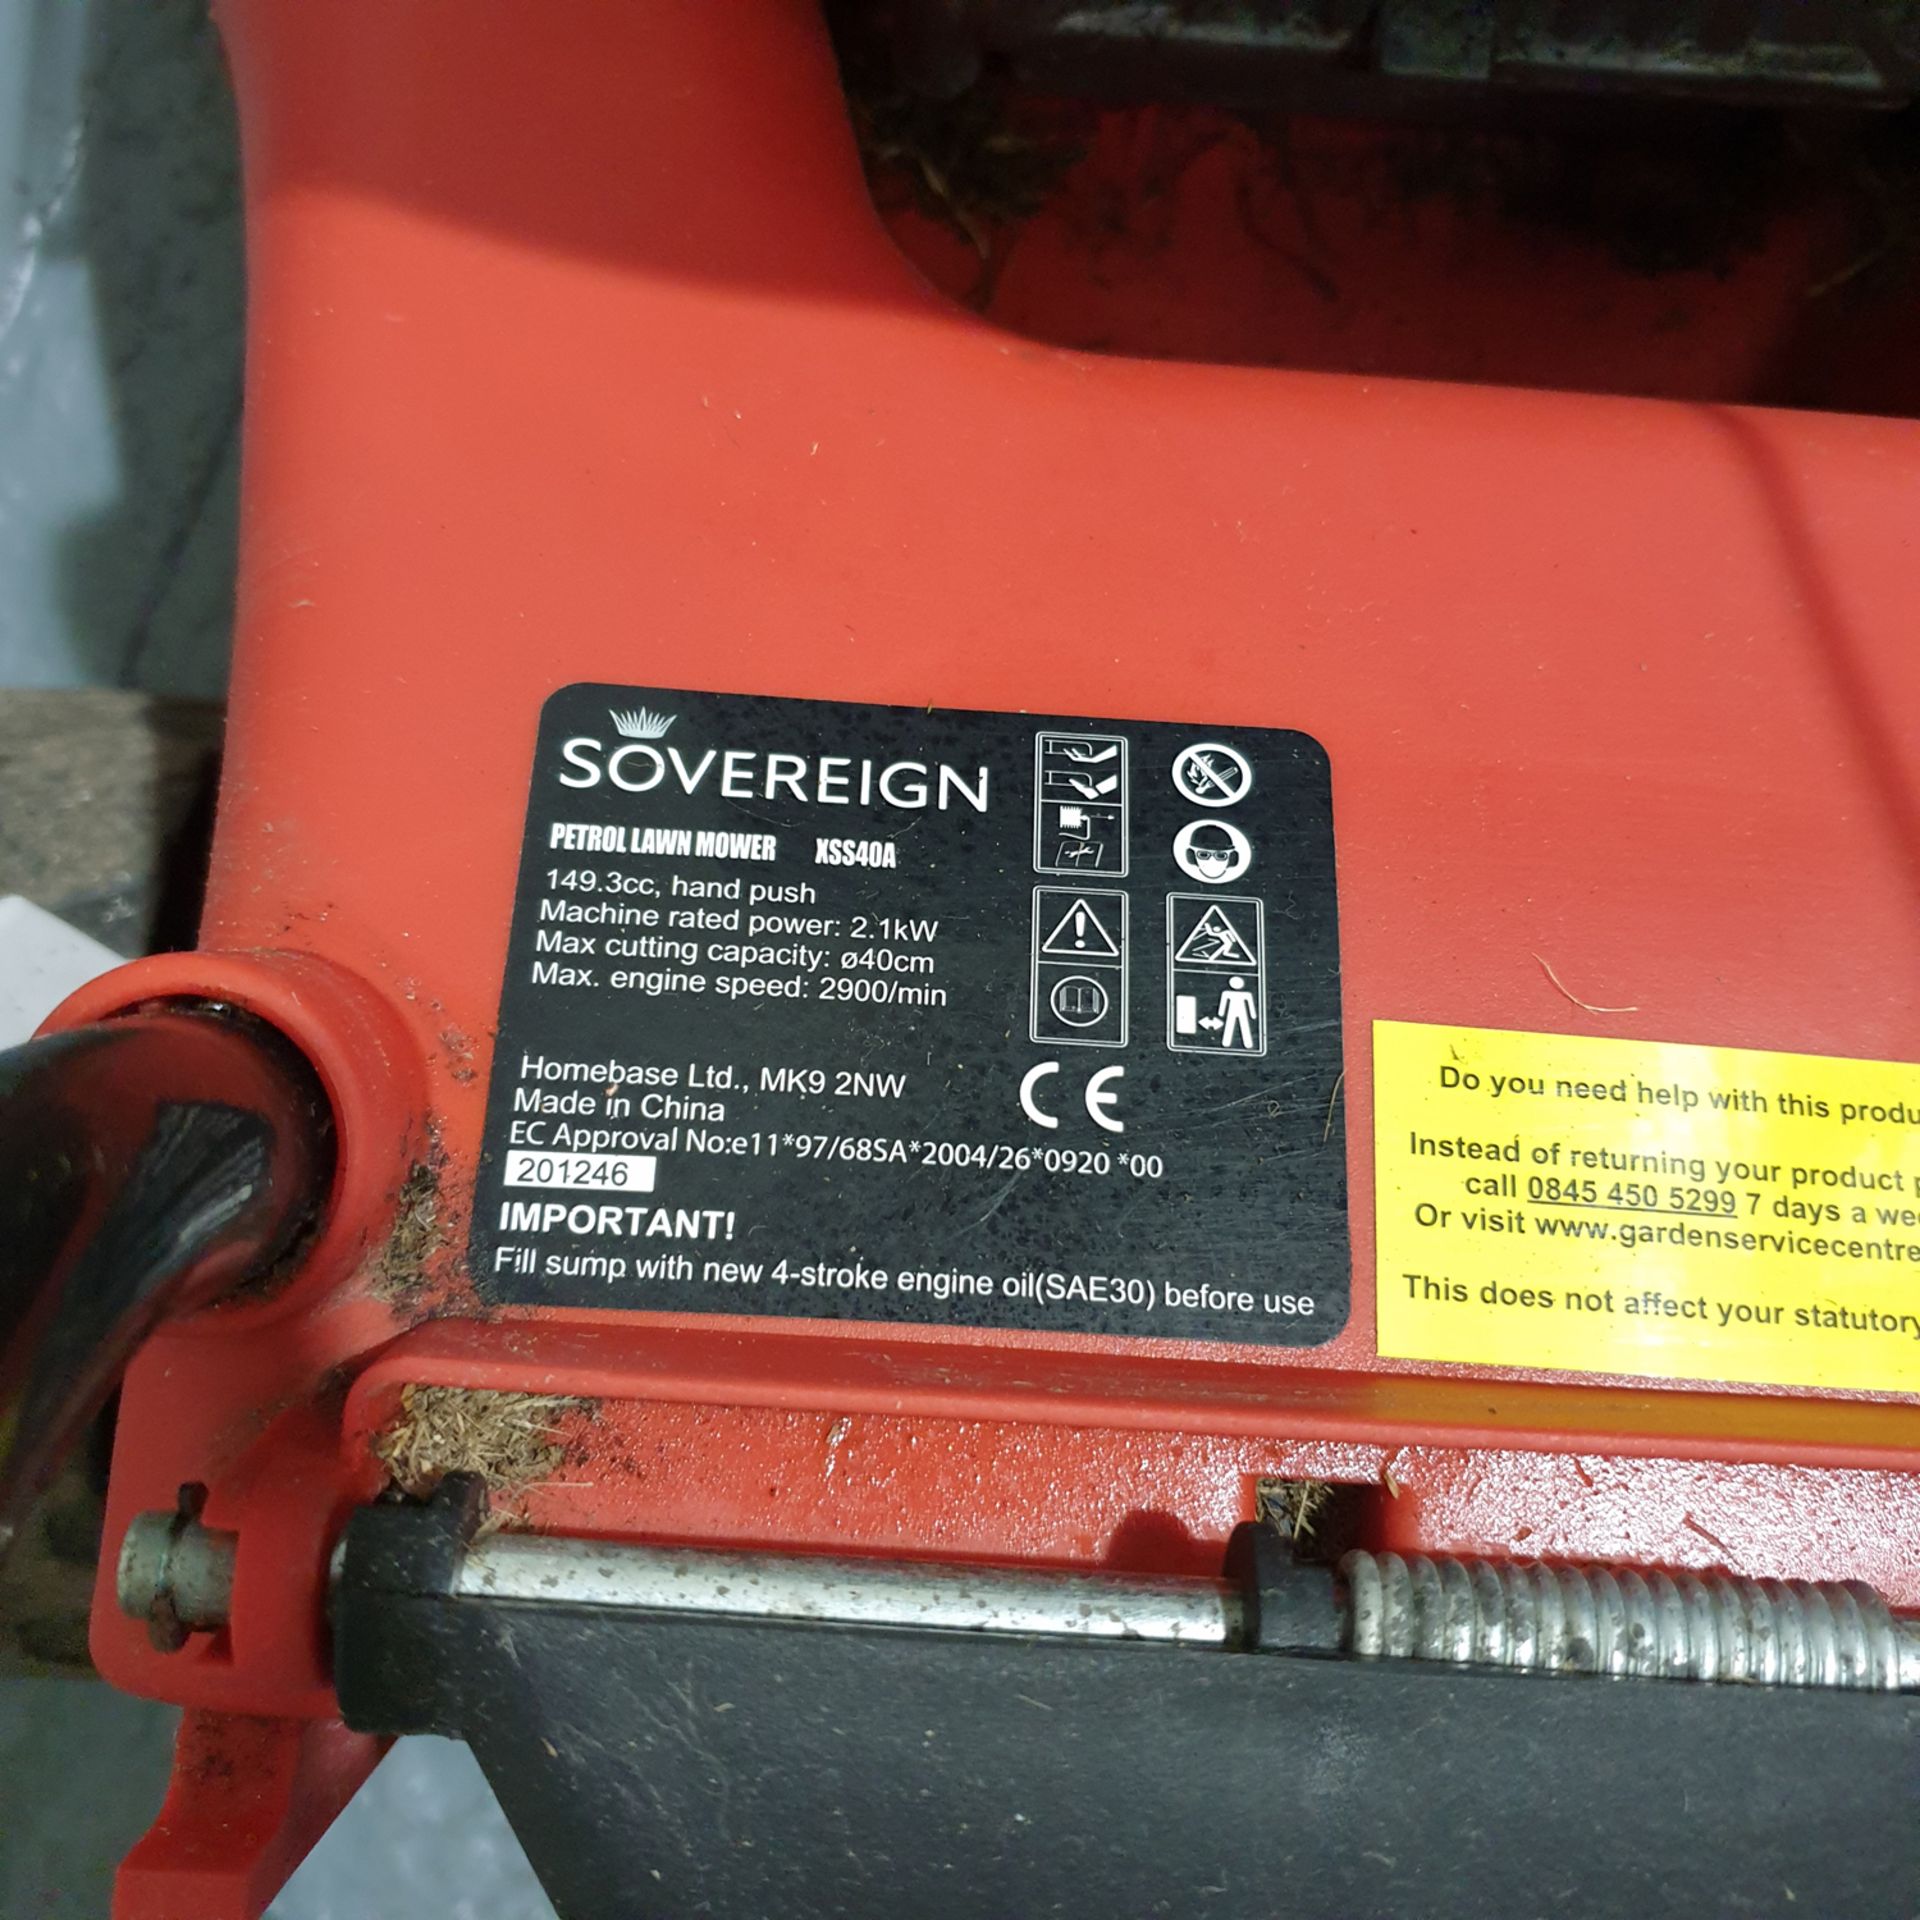 SOVEREIGN Model XSS40A Petrol Lawn Mower. 149.3cc Hand Push. - Image 6 of 6